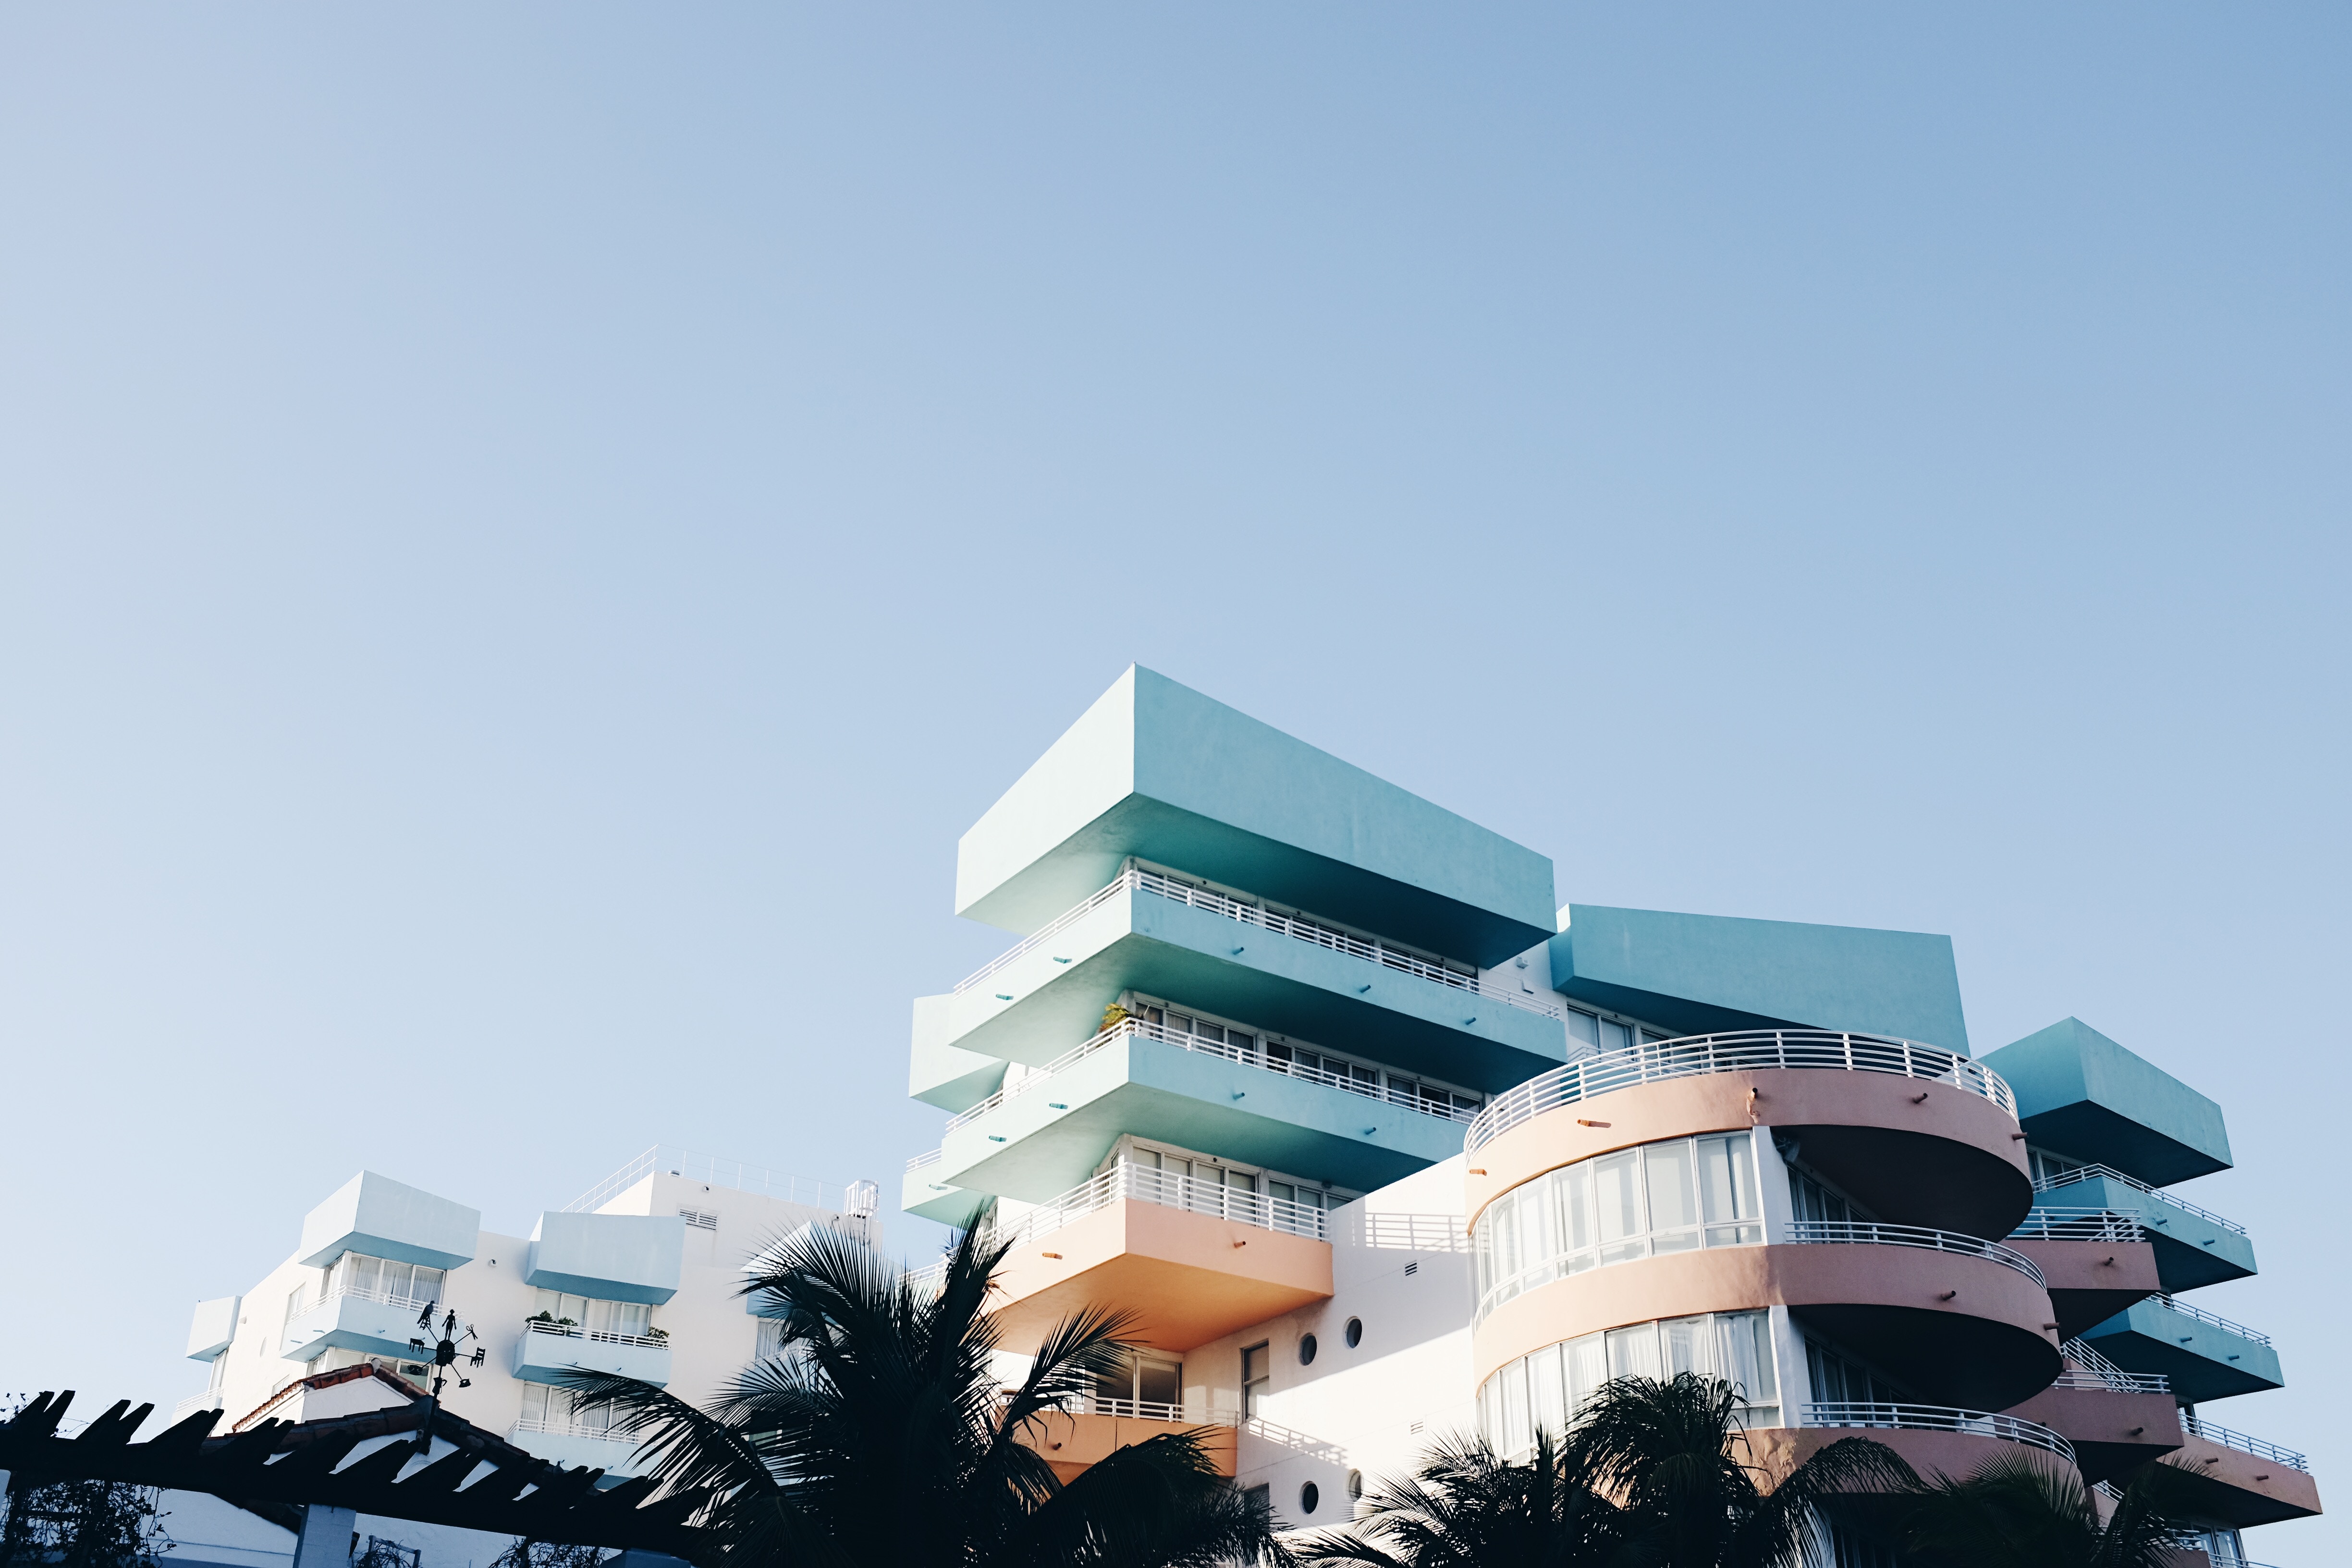 4896x3264 #architecture, #miami, #pink, #balcony, #sky, #tree, #south beach, #blue, #hotel, #building, #Free , #pastel, #apartment, #palm. Mocah HD Wallpaper